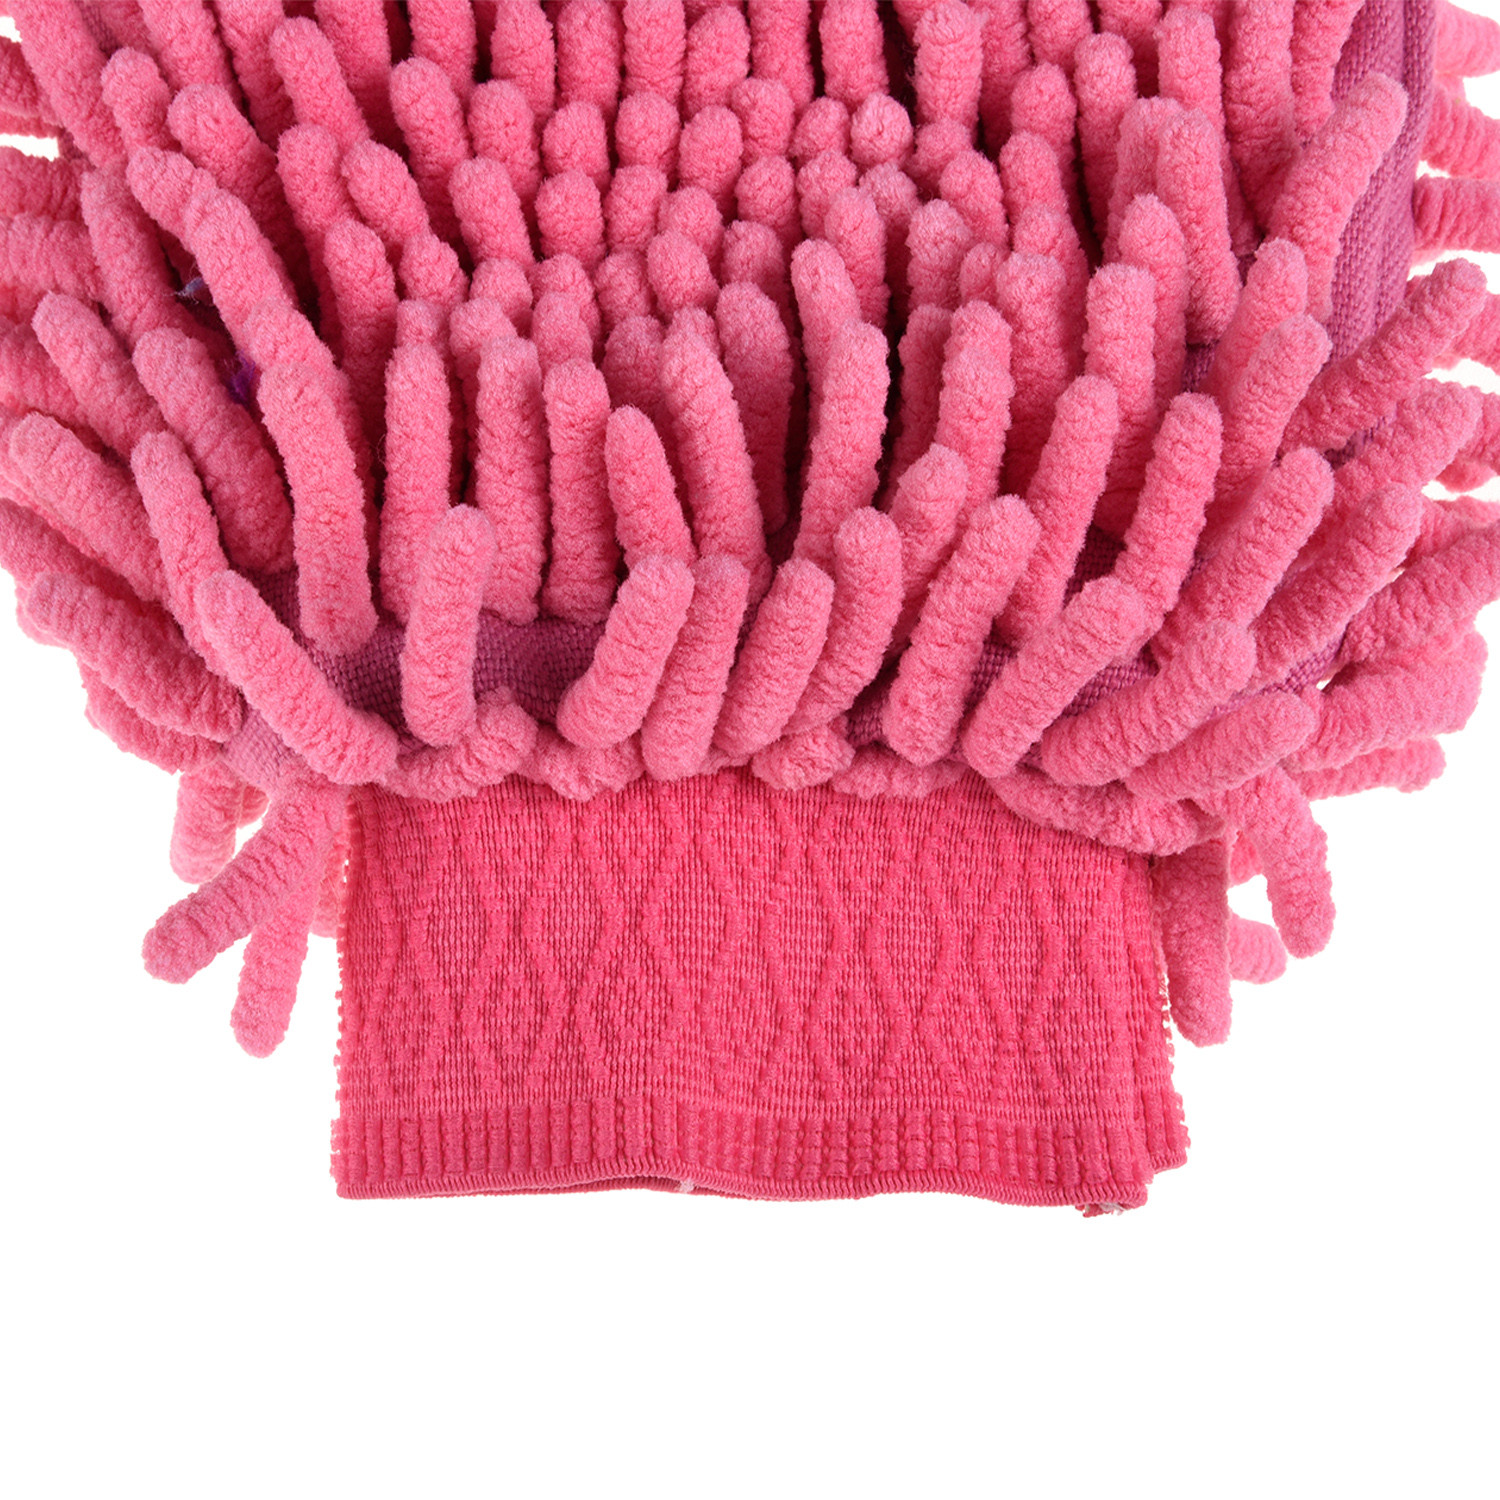 Kuber Industries Chenille Mitts|Microfiber Cleaning Gloves|Inside Waterproof Cloth Gloves|100 Gram Weighted Hand Duster|Hand Chenille Gloves For Car|Glass (Pink)